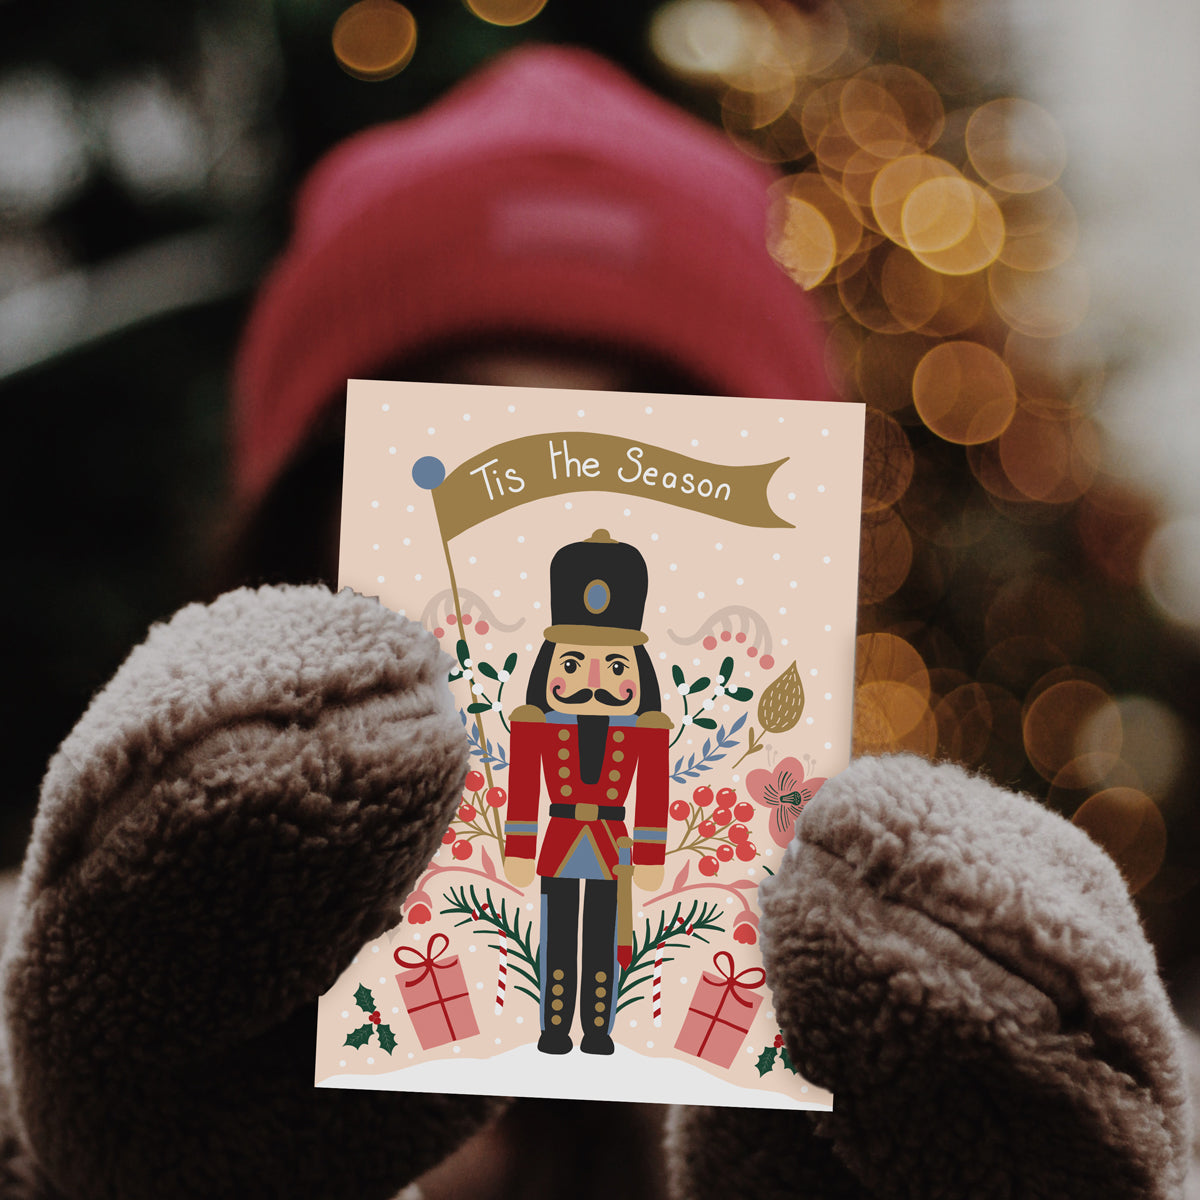 Tis the Season Christmas Card - Toy Soldier flying a Tis the Season flag and surrounded by Floral decorations. Merry Christmas Gift Shop